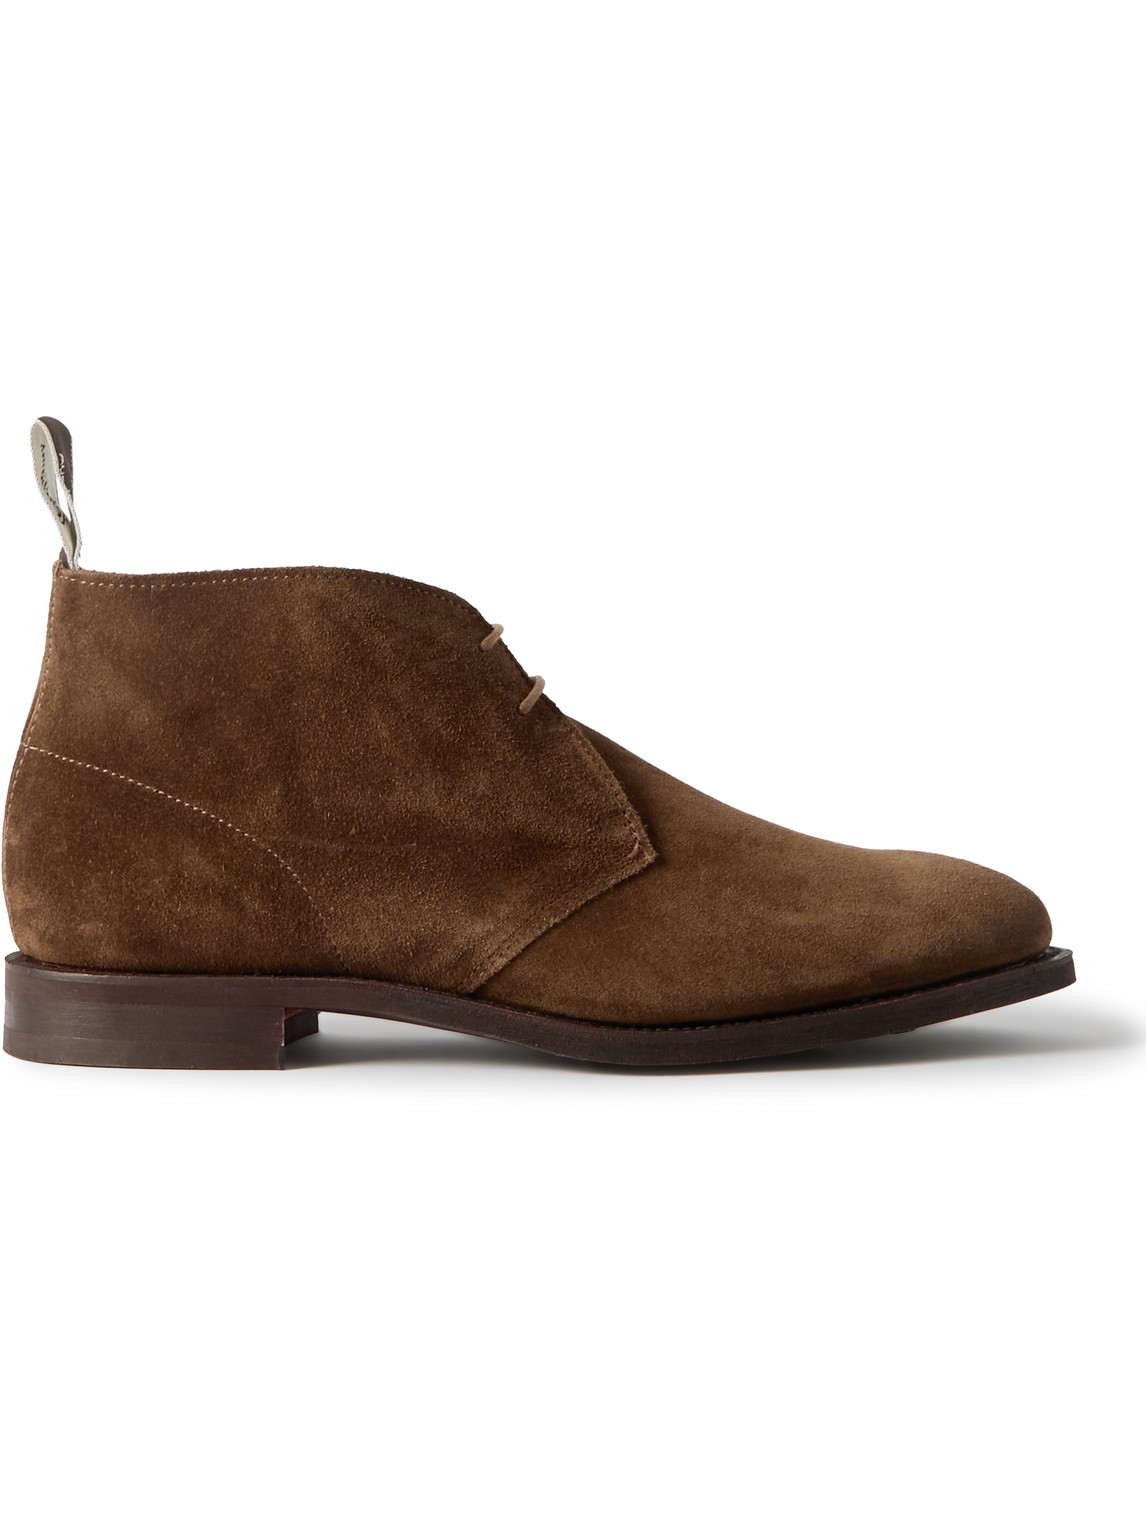 R.m.williams Kingscliff Suede Chukka Boots In Brown